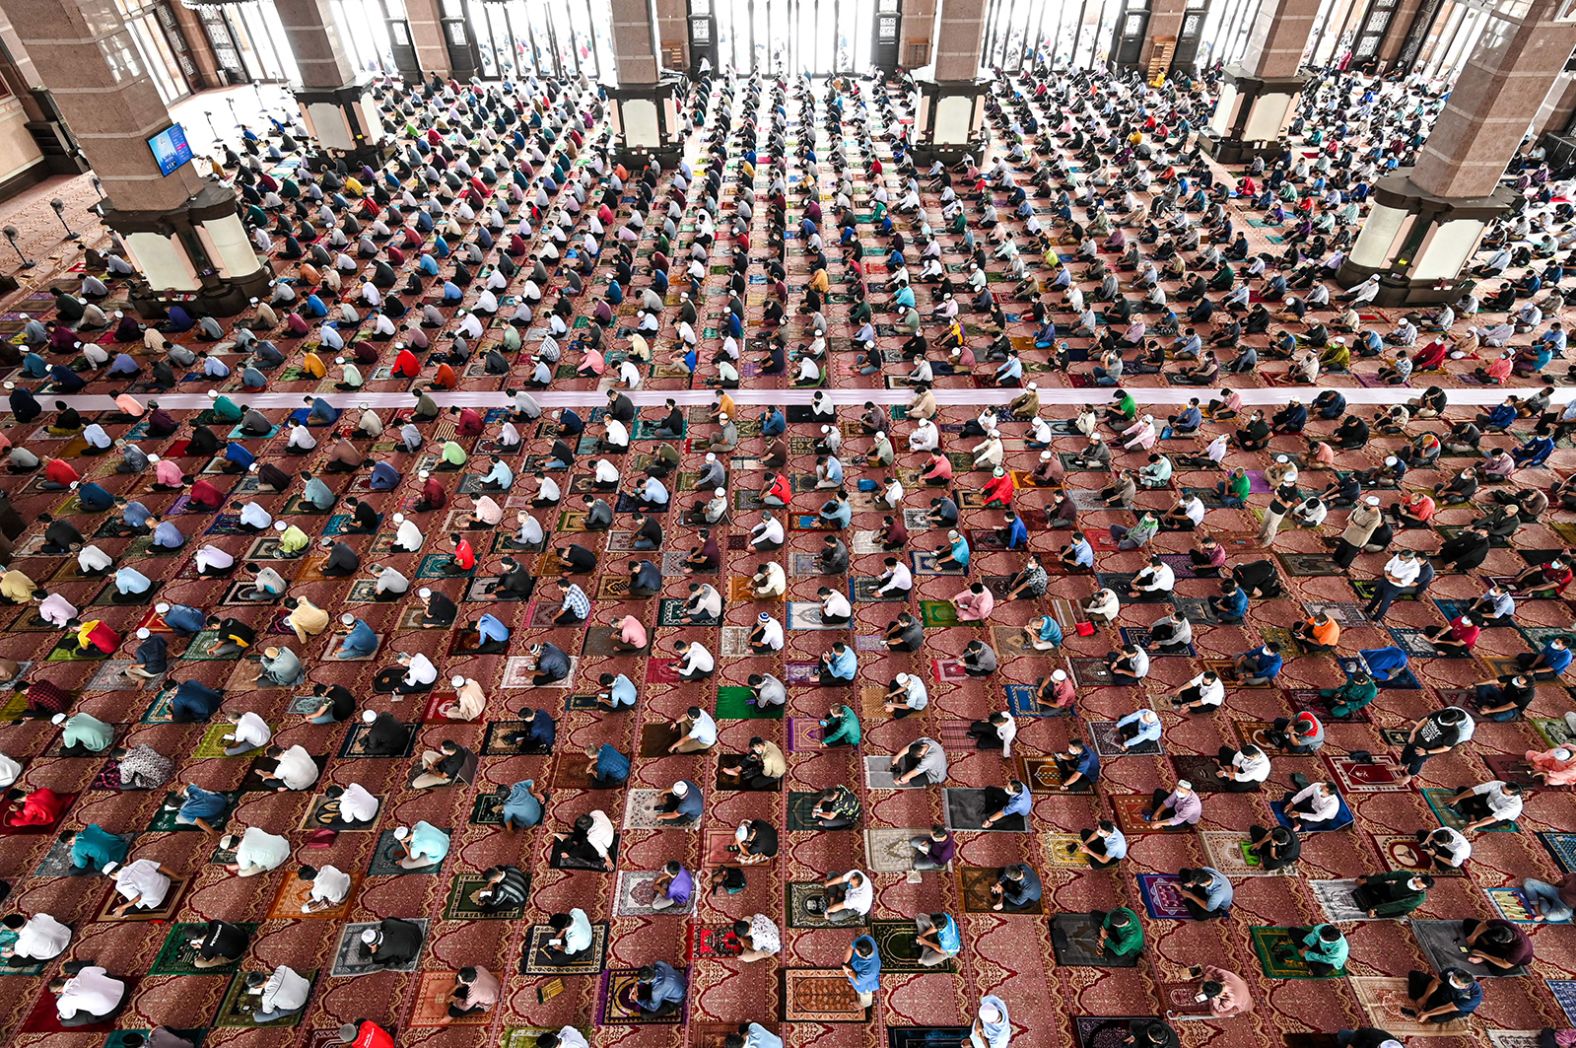 People practice social distancing at the Putra Mosque in Putrajaya, Malaysia, on April 16.